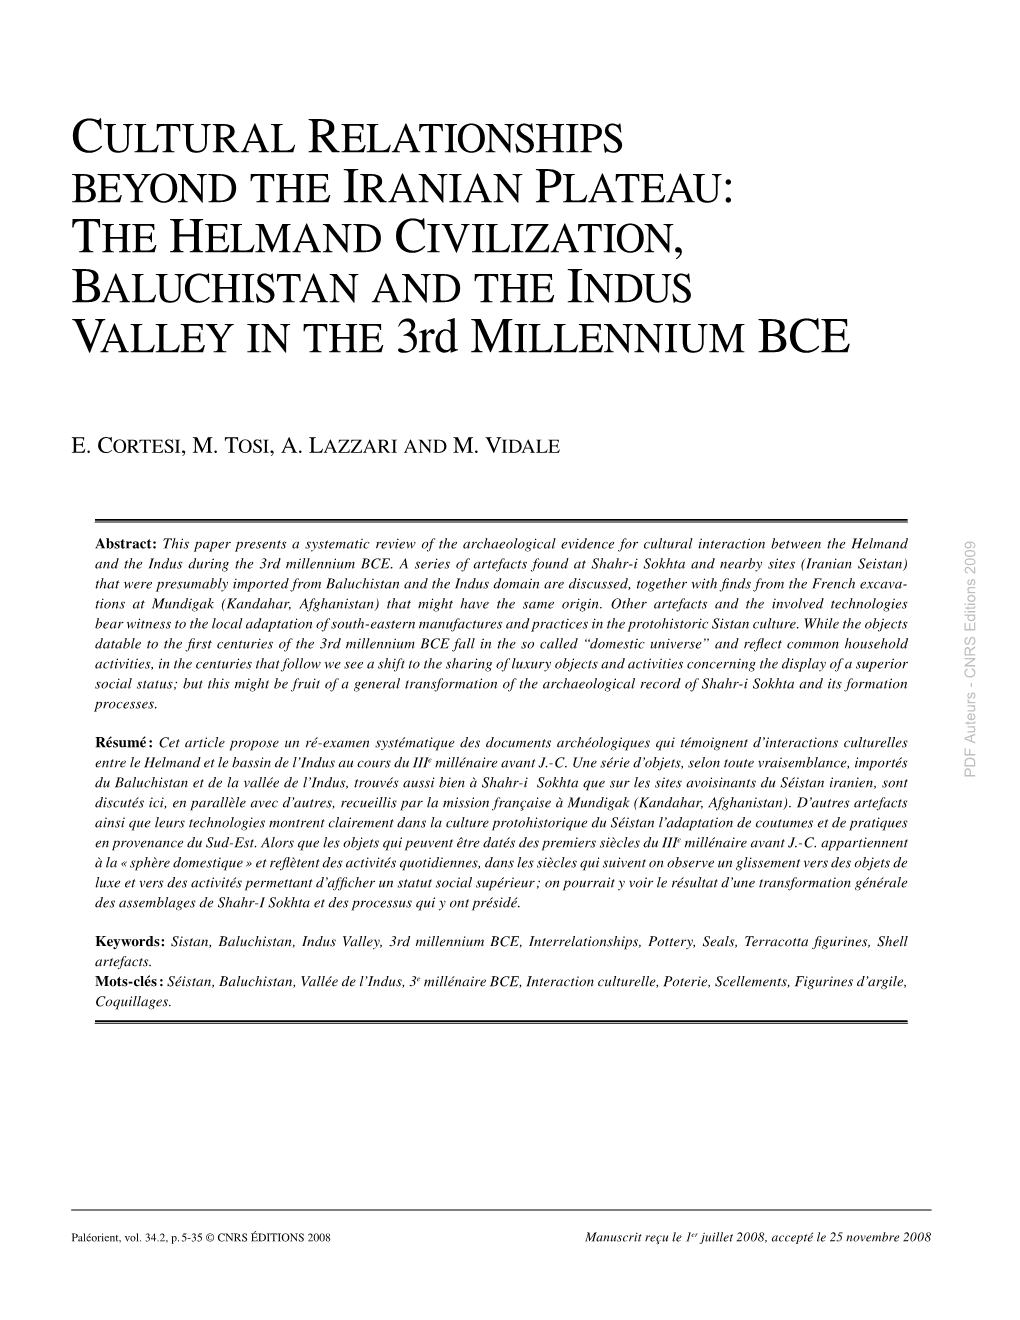 THE HELMAND CIVILIZATION, BALUCHISTAN and the INDUS VALLEY in the 3Rd MILLENNIUM BCE